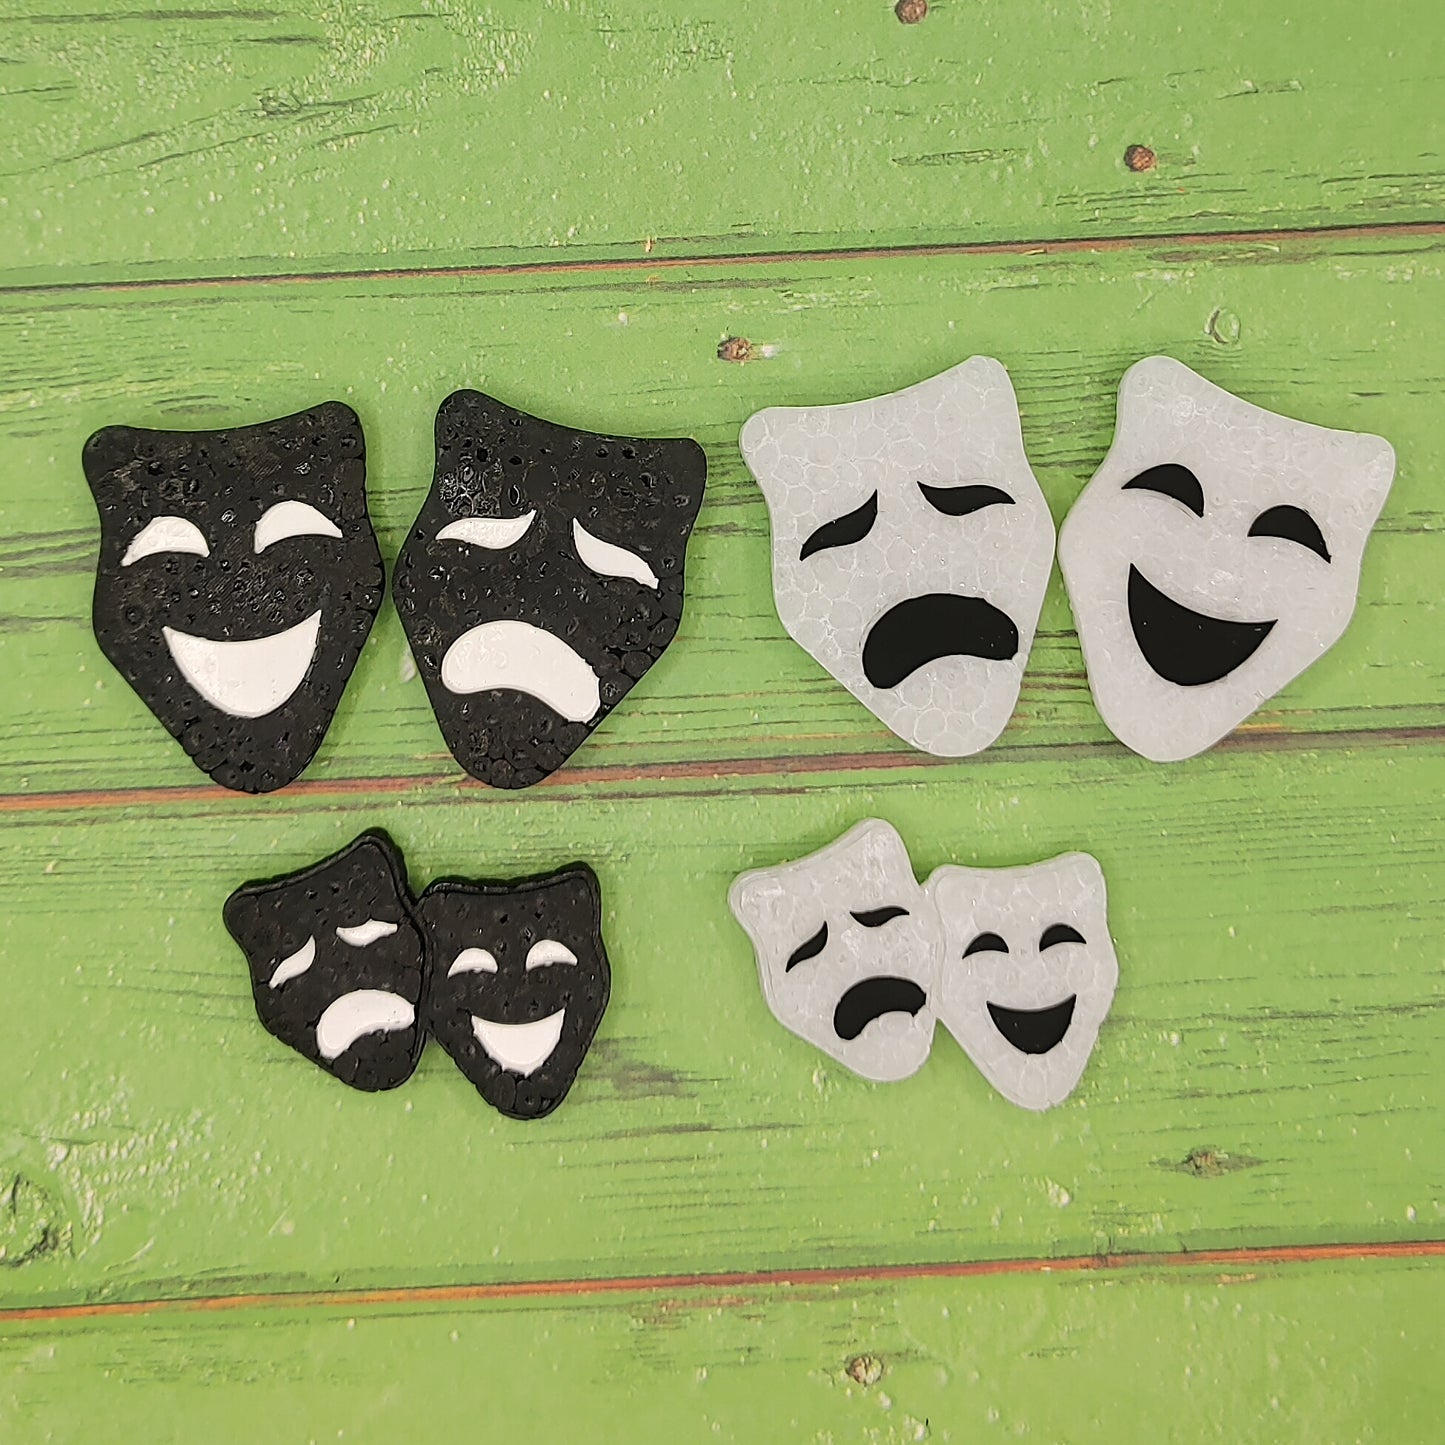 Theater Masks Vent Clip Tray - Silicone Freshie Mold